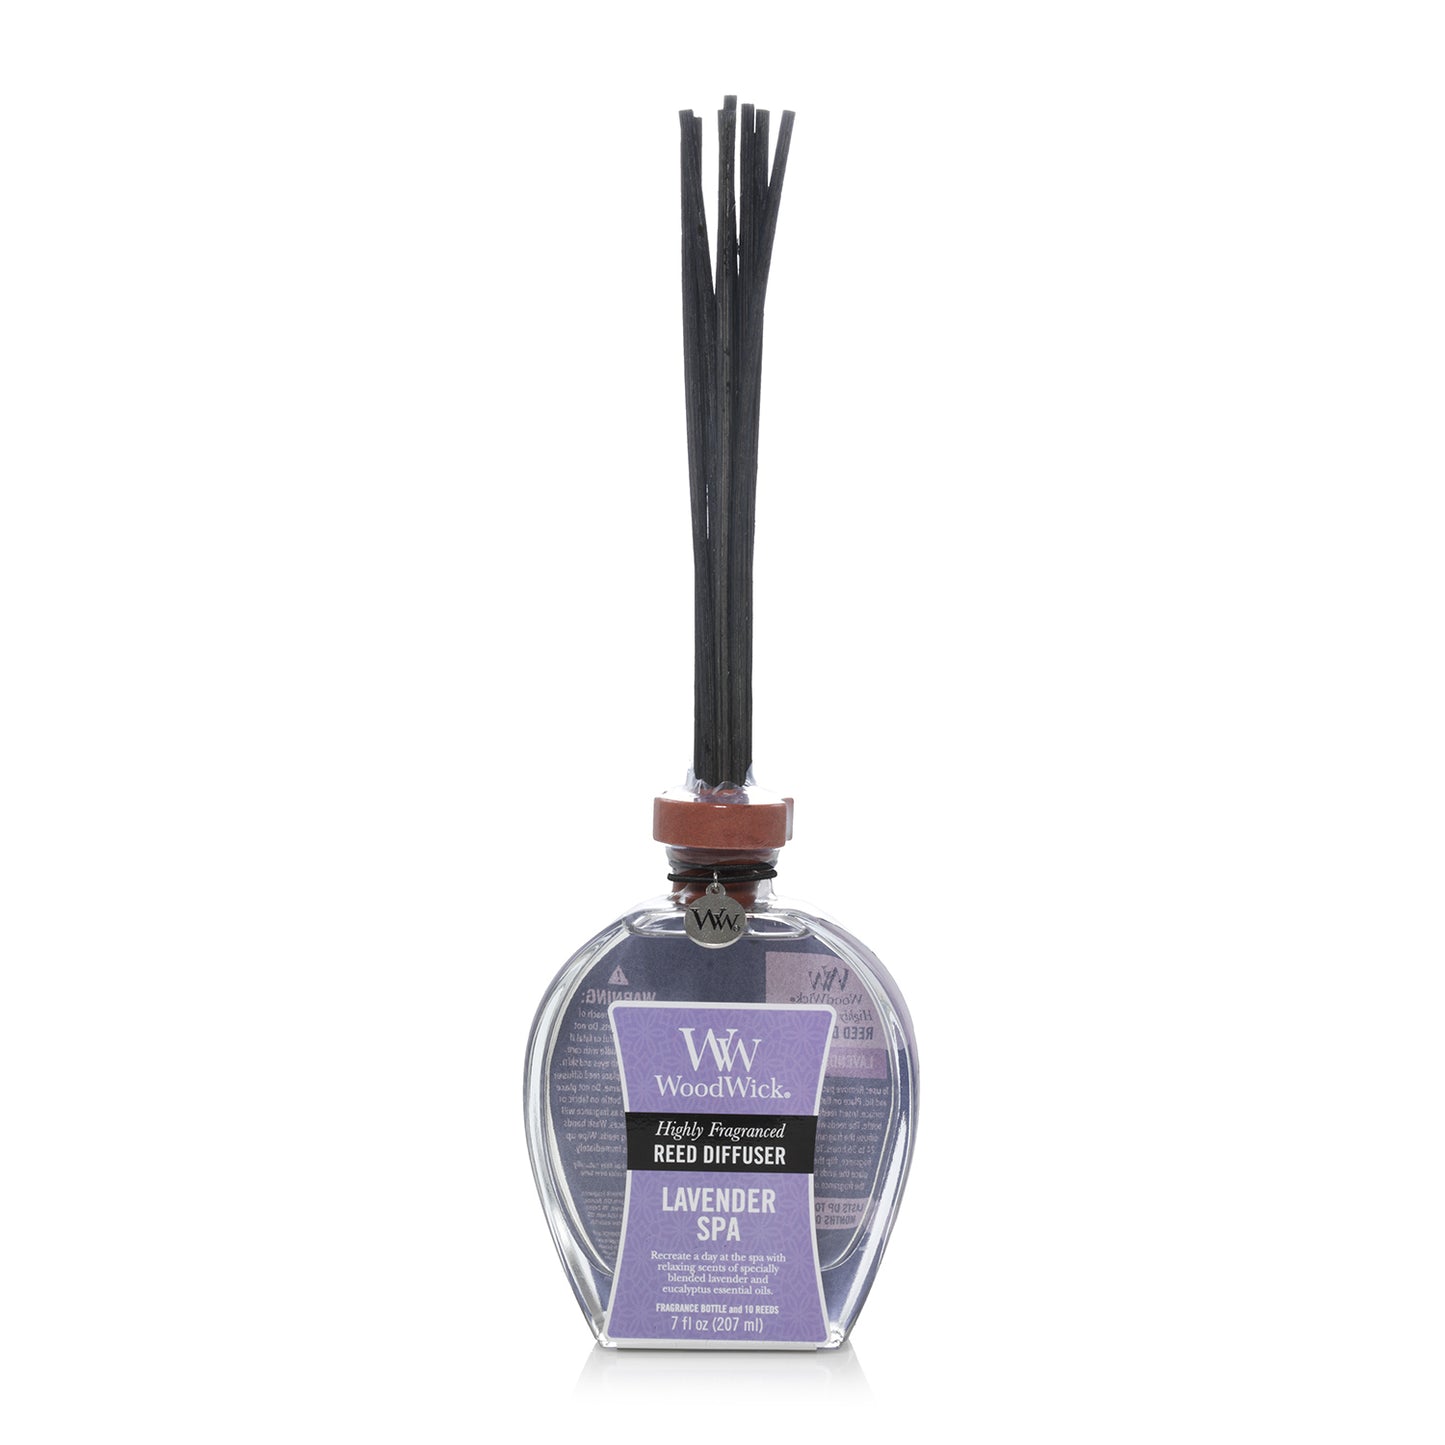 WoodWick Lavender Spa Reed Diffuser